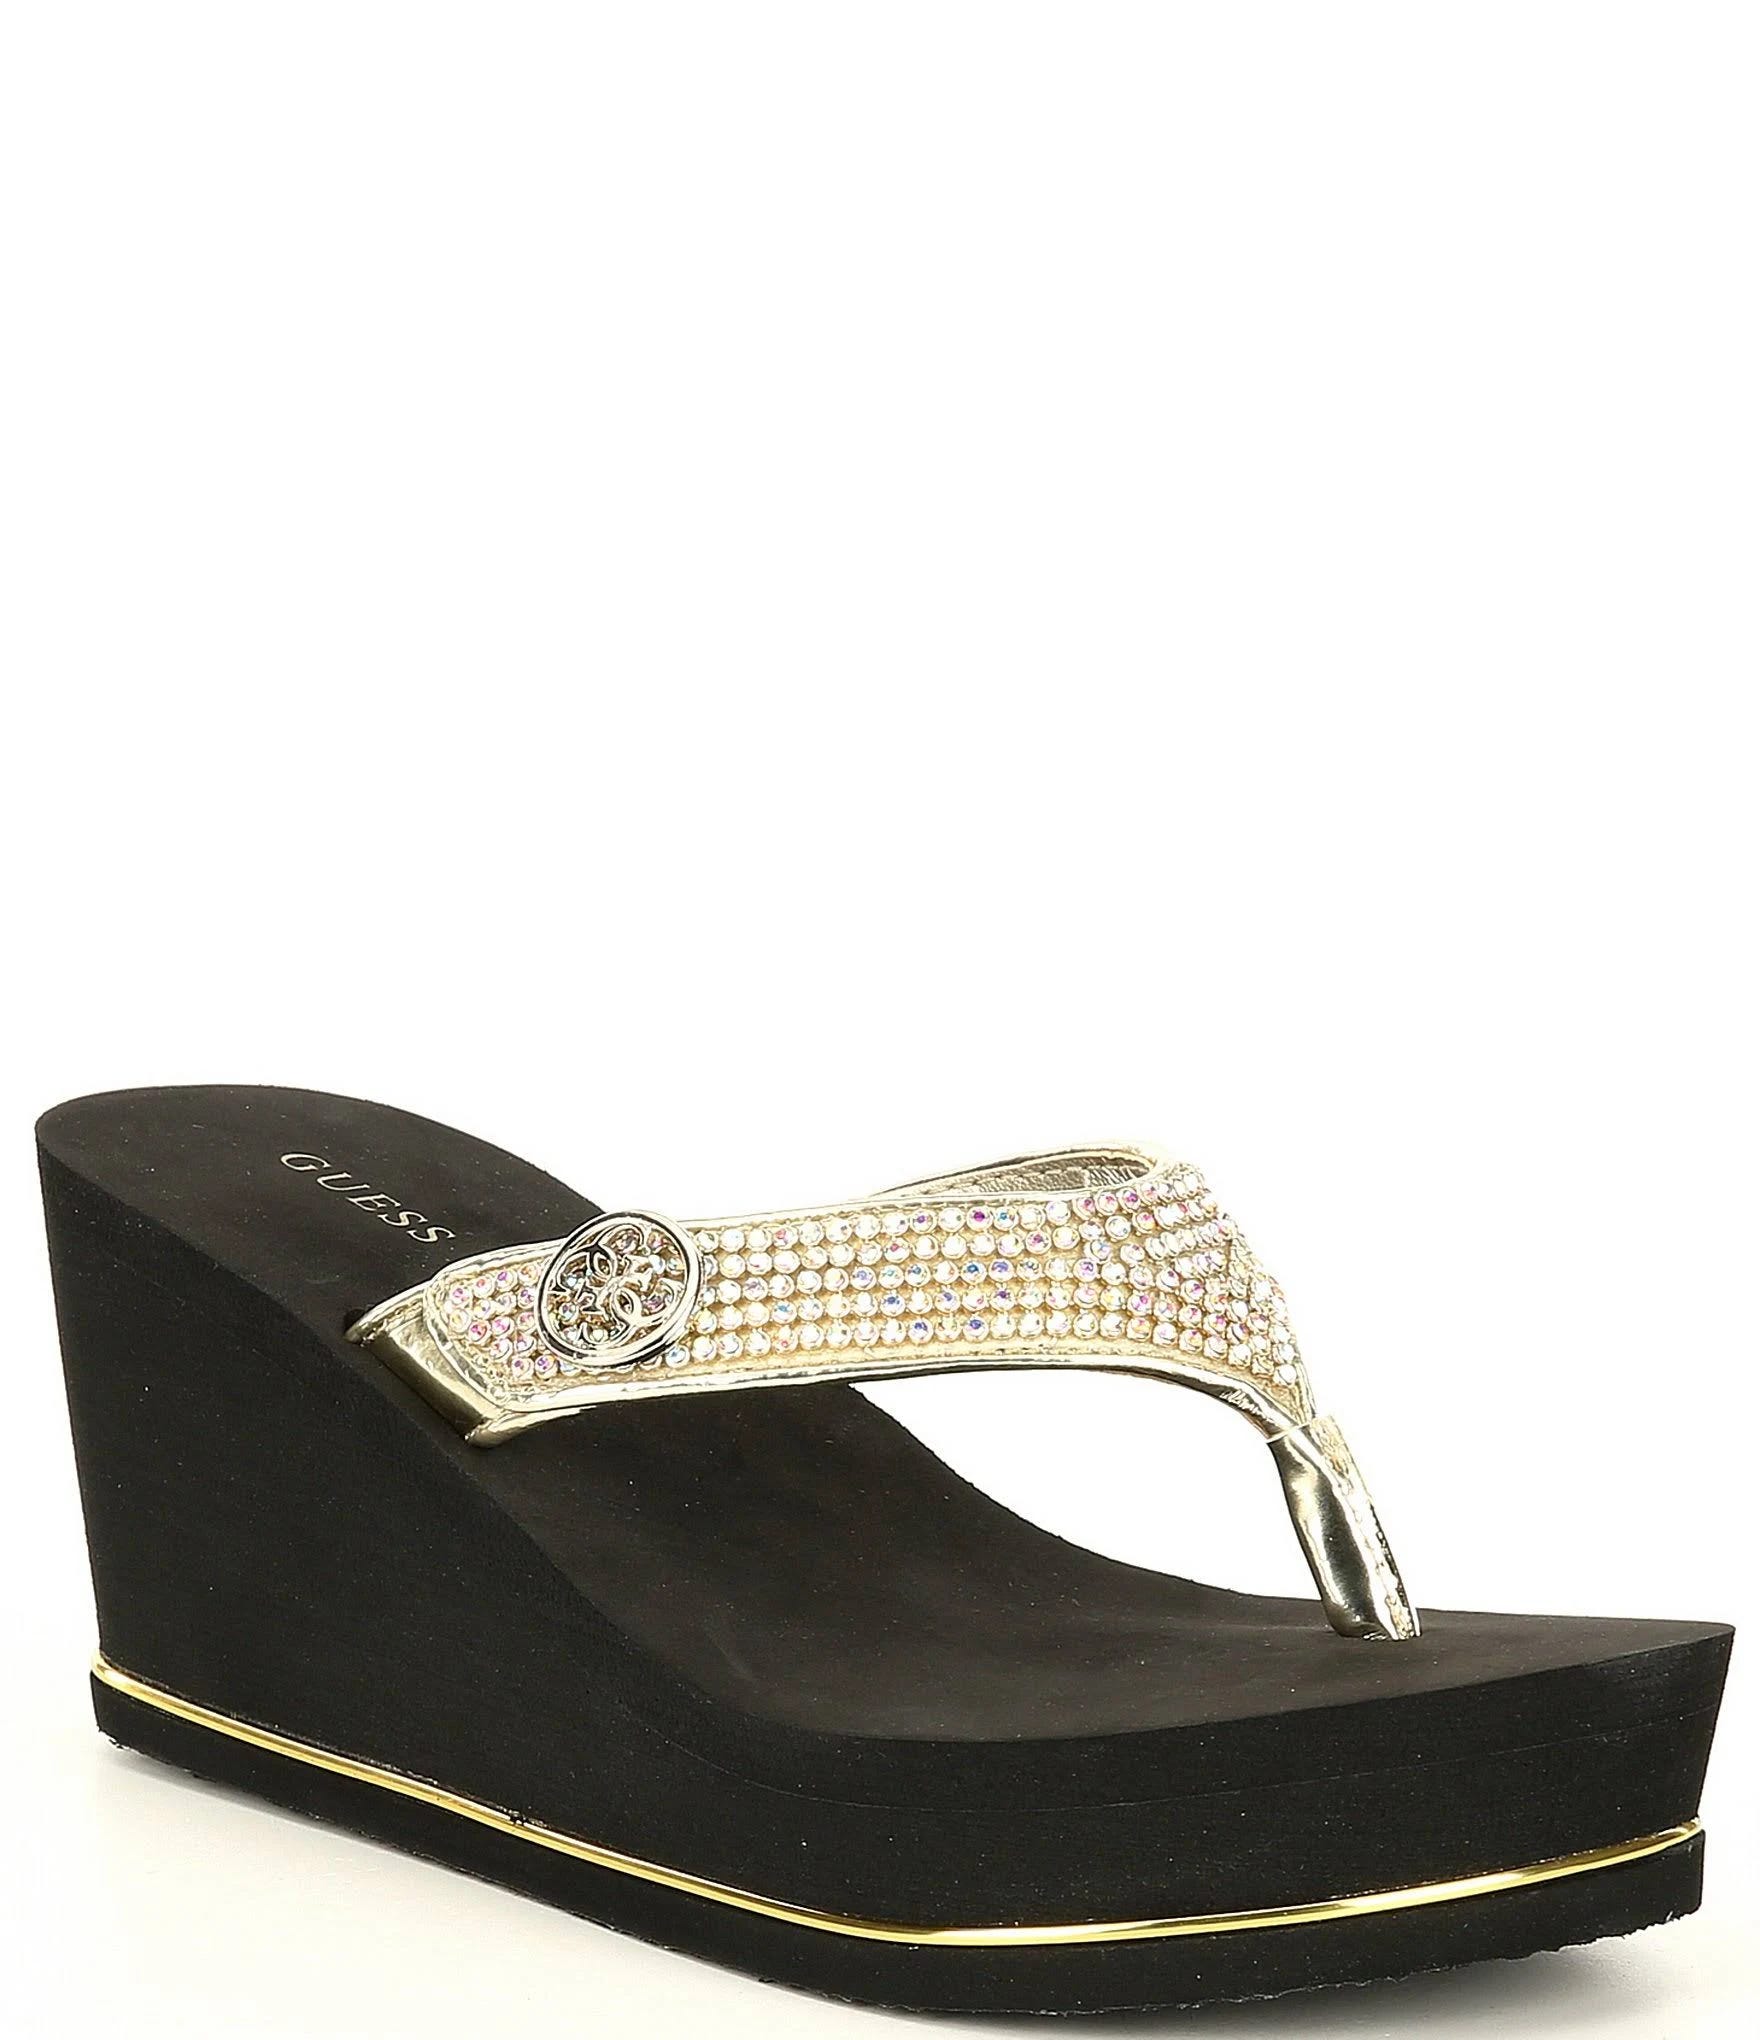 Embellished Gold Wedge Shoes for Women | Image